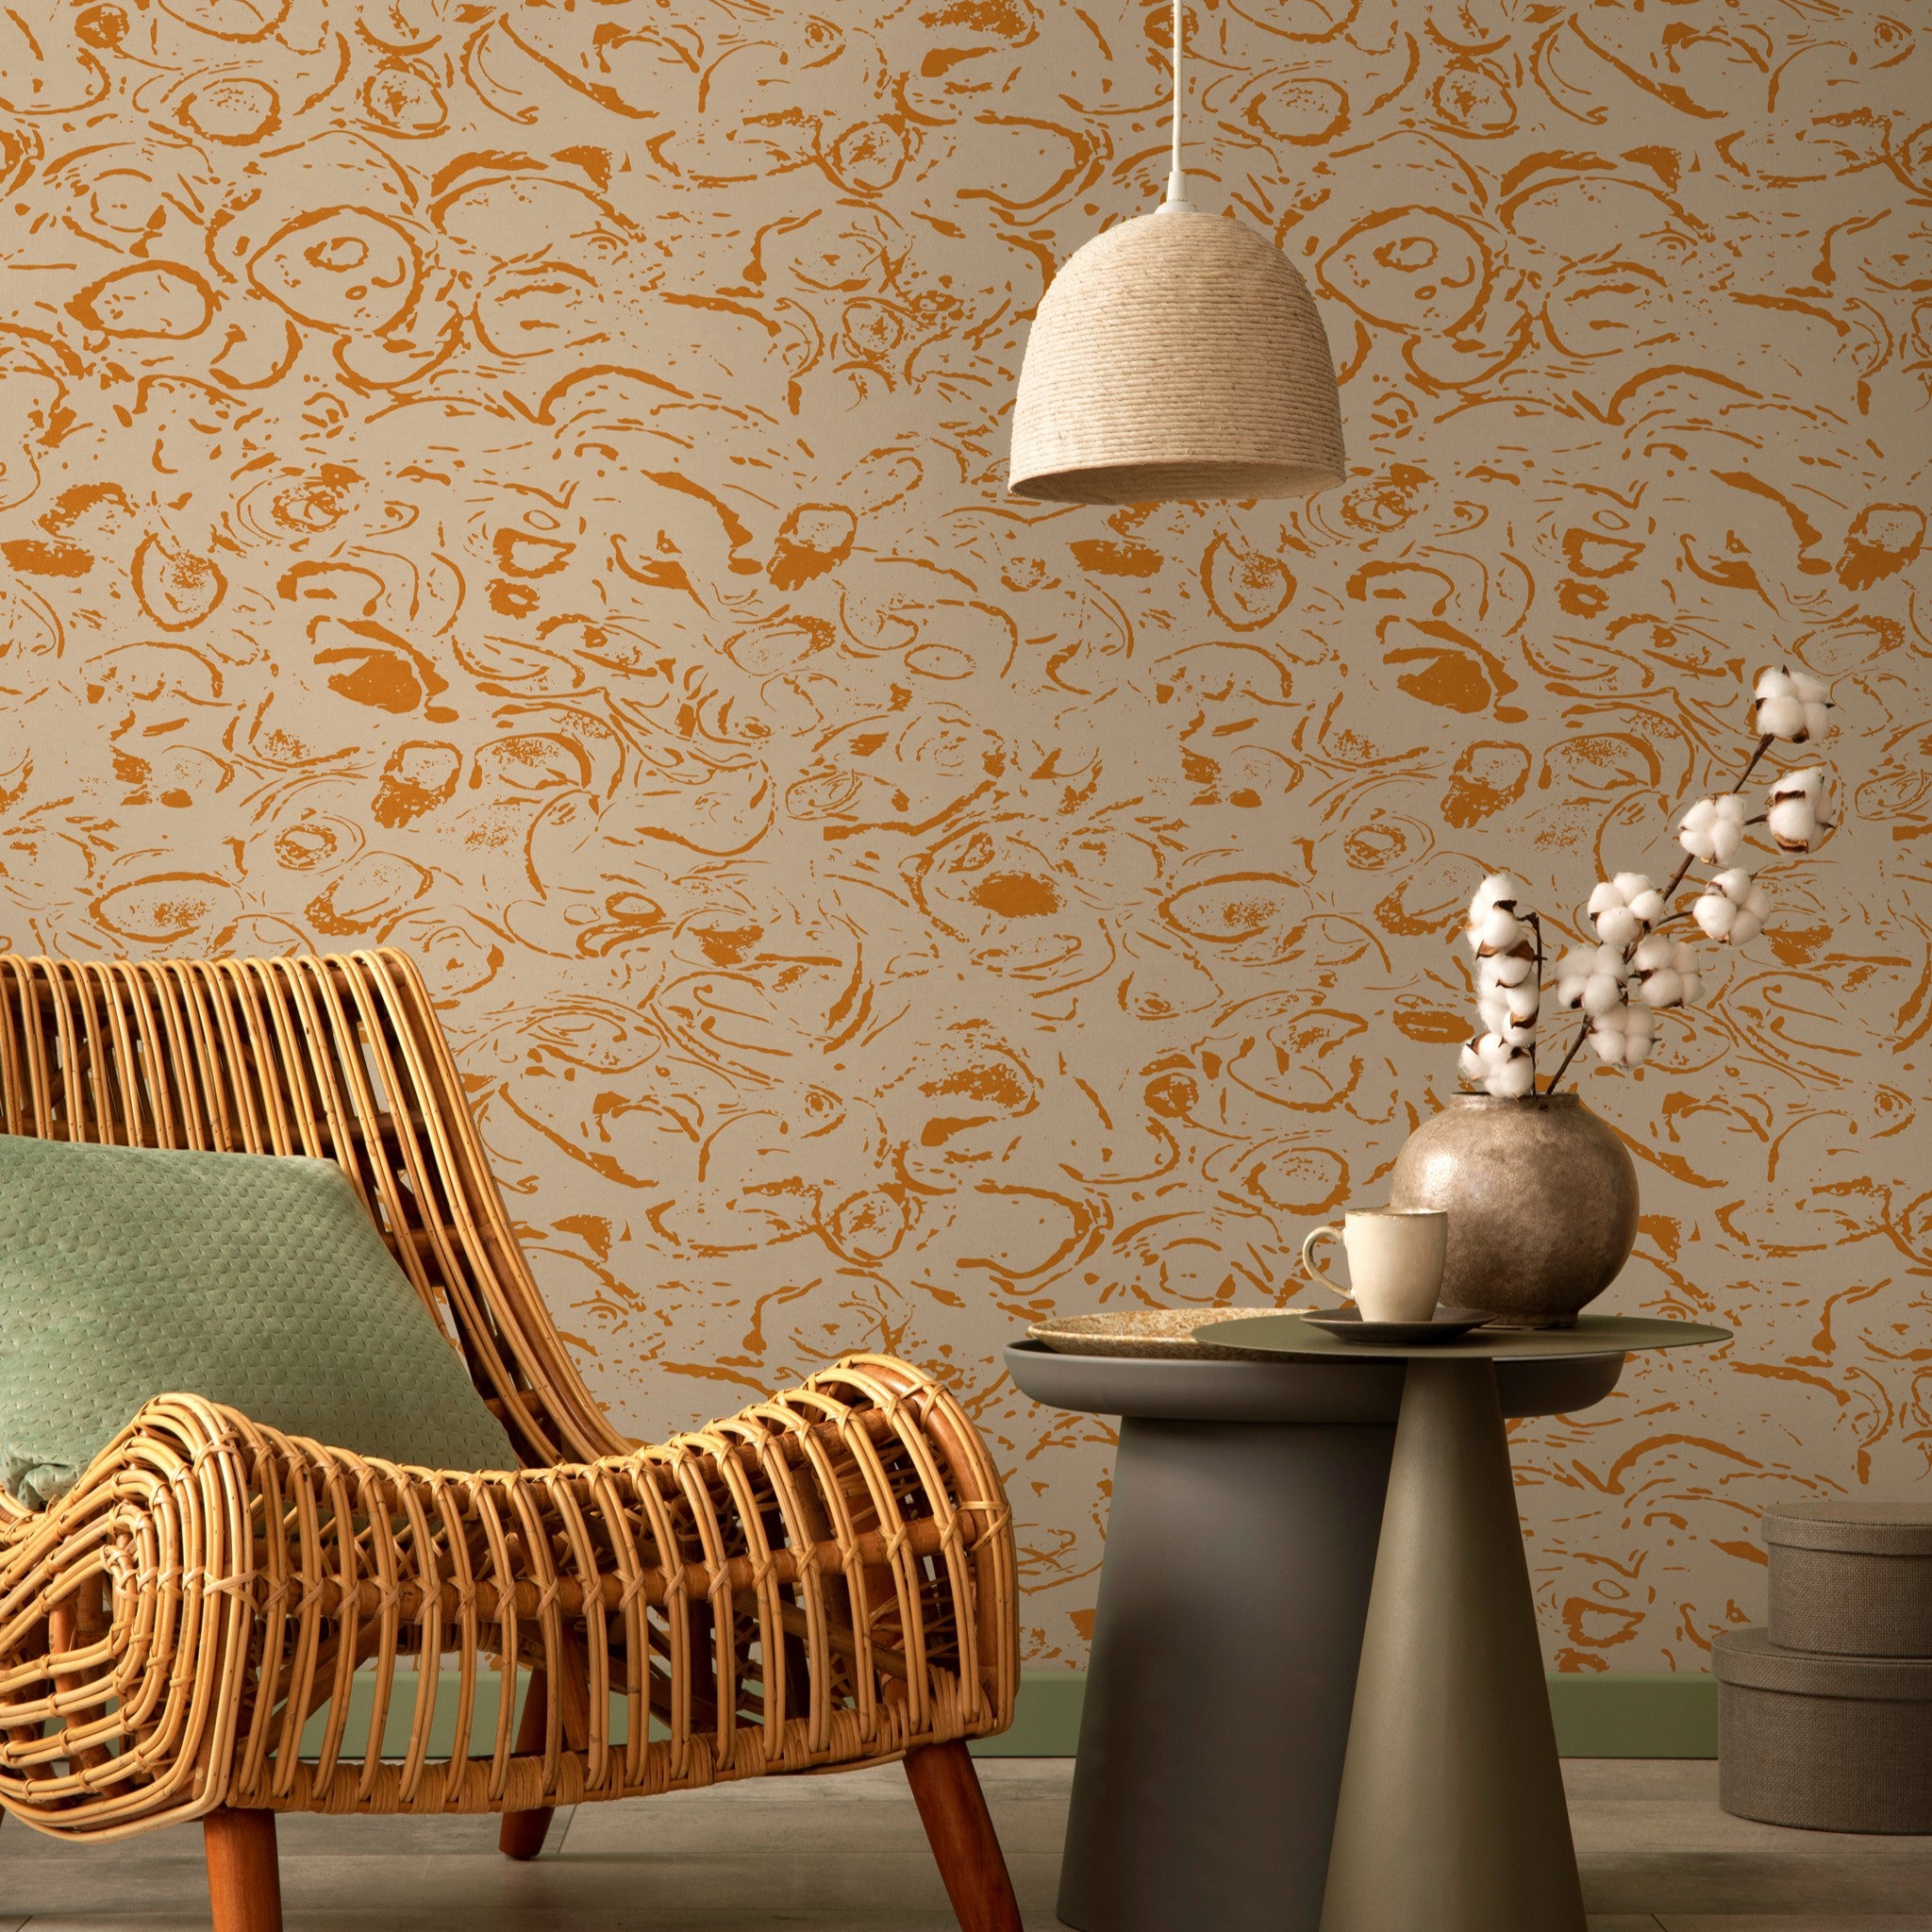 "Wall Blush Ranger Wallpaper featured in stylish modern living room with rattan chair and pendant lamp."